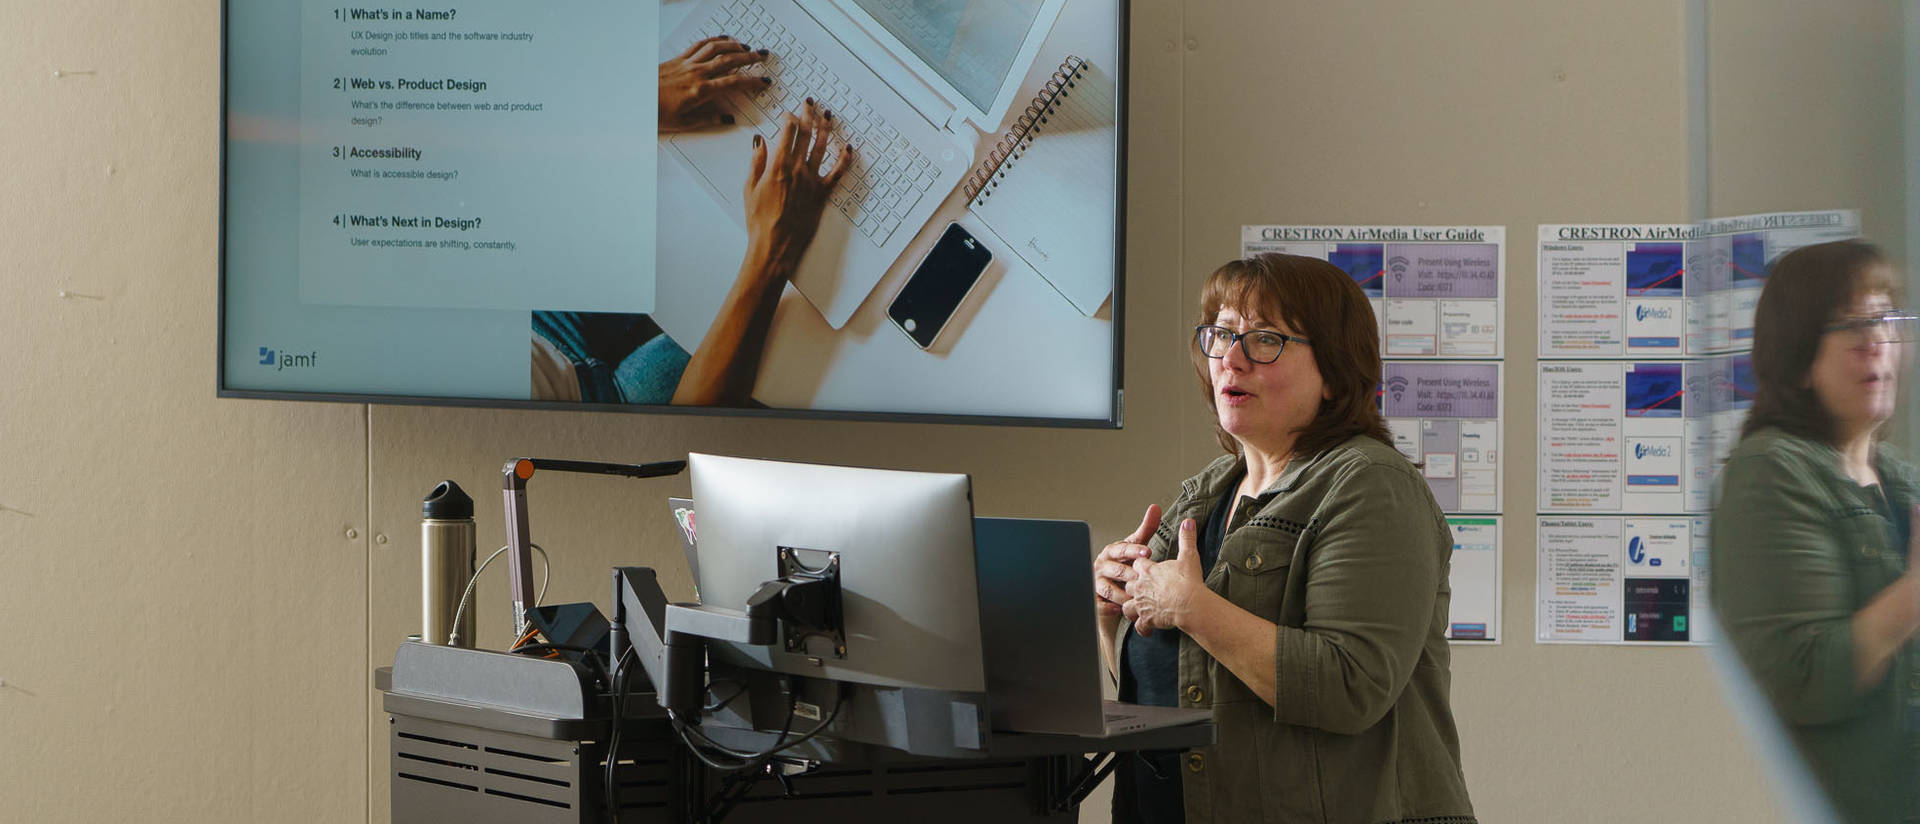 Woman in a classroom showing a Powerpoint on a screen.